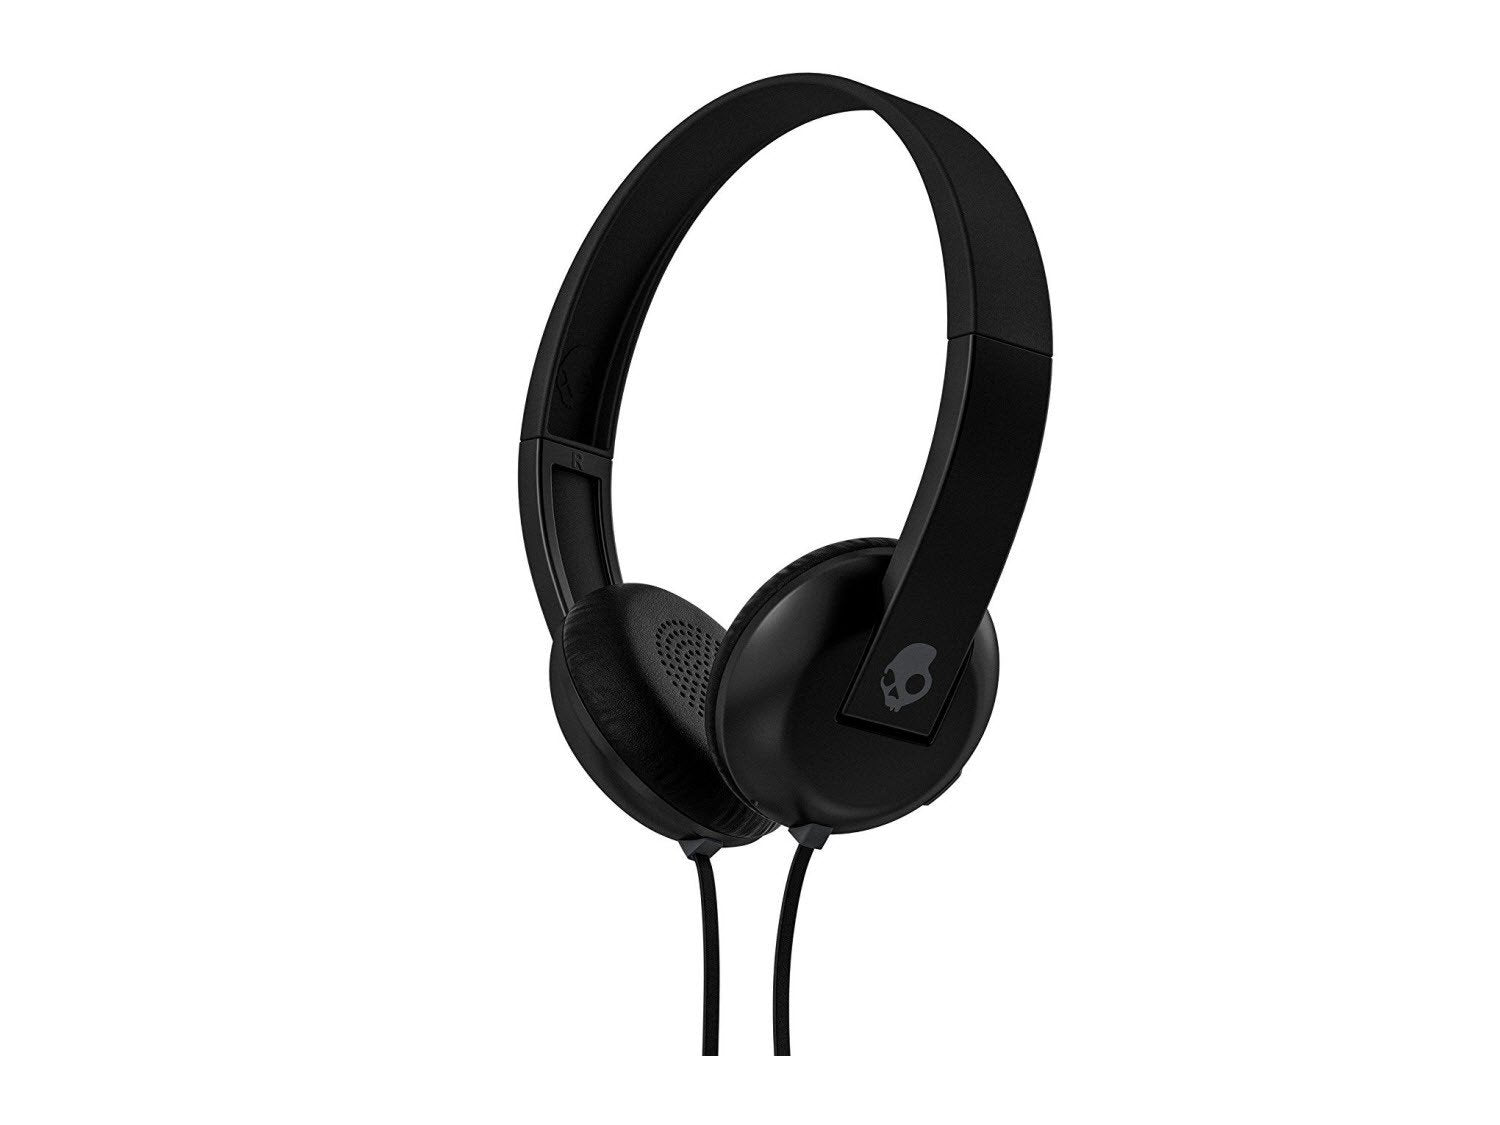 Skullcandy Uproar On-ear Headphones with Built-In Mic and Remote - Black